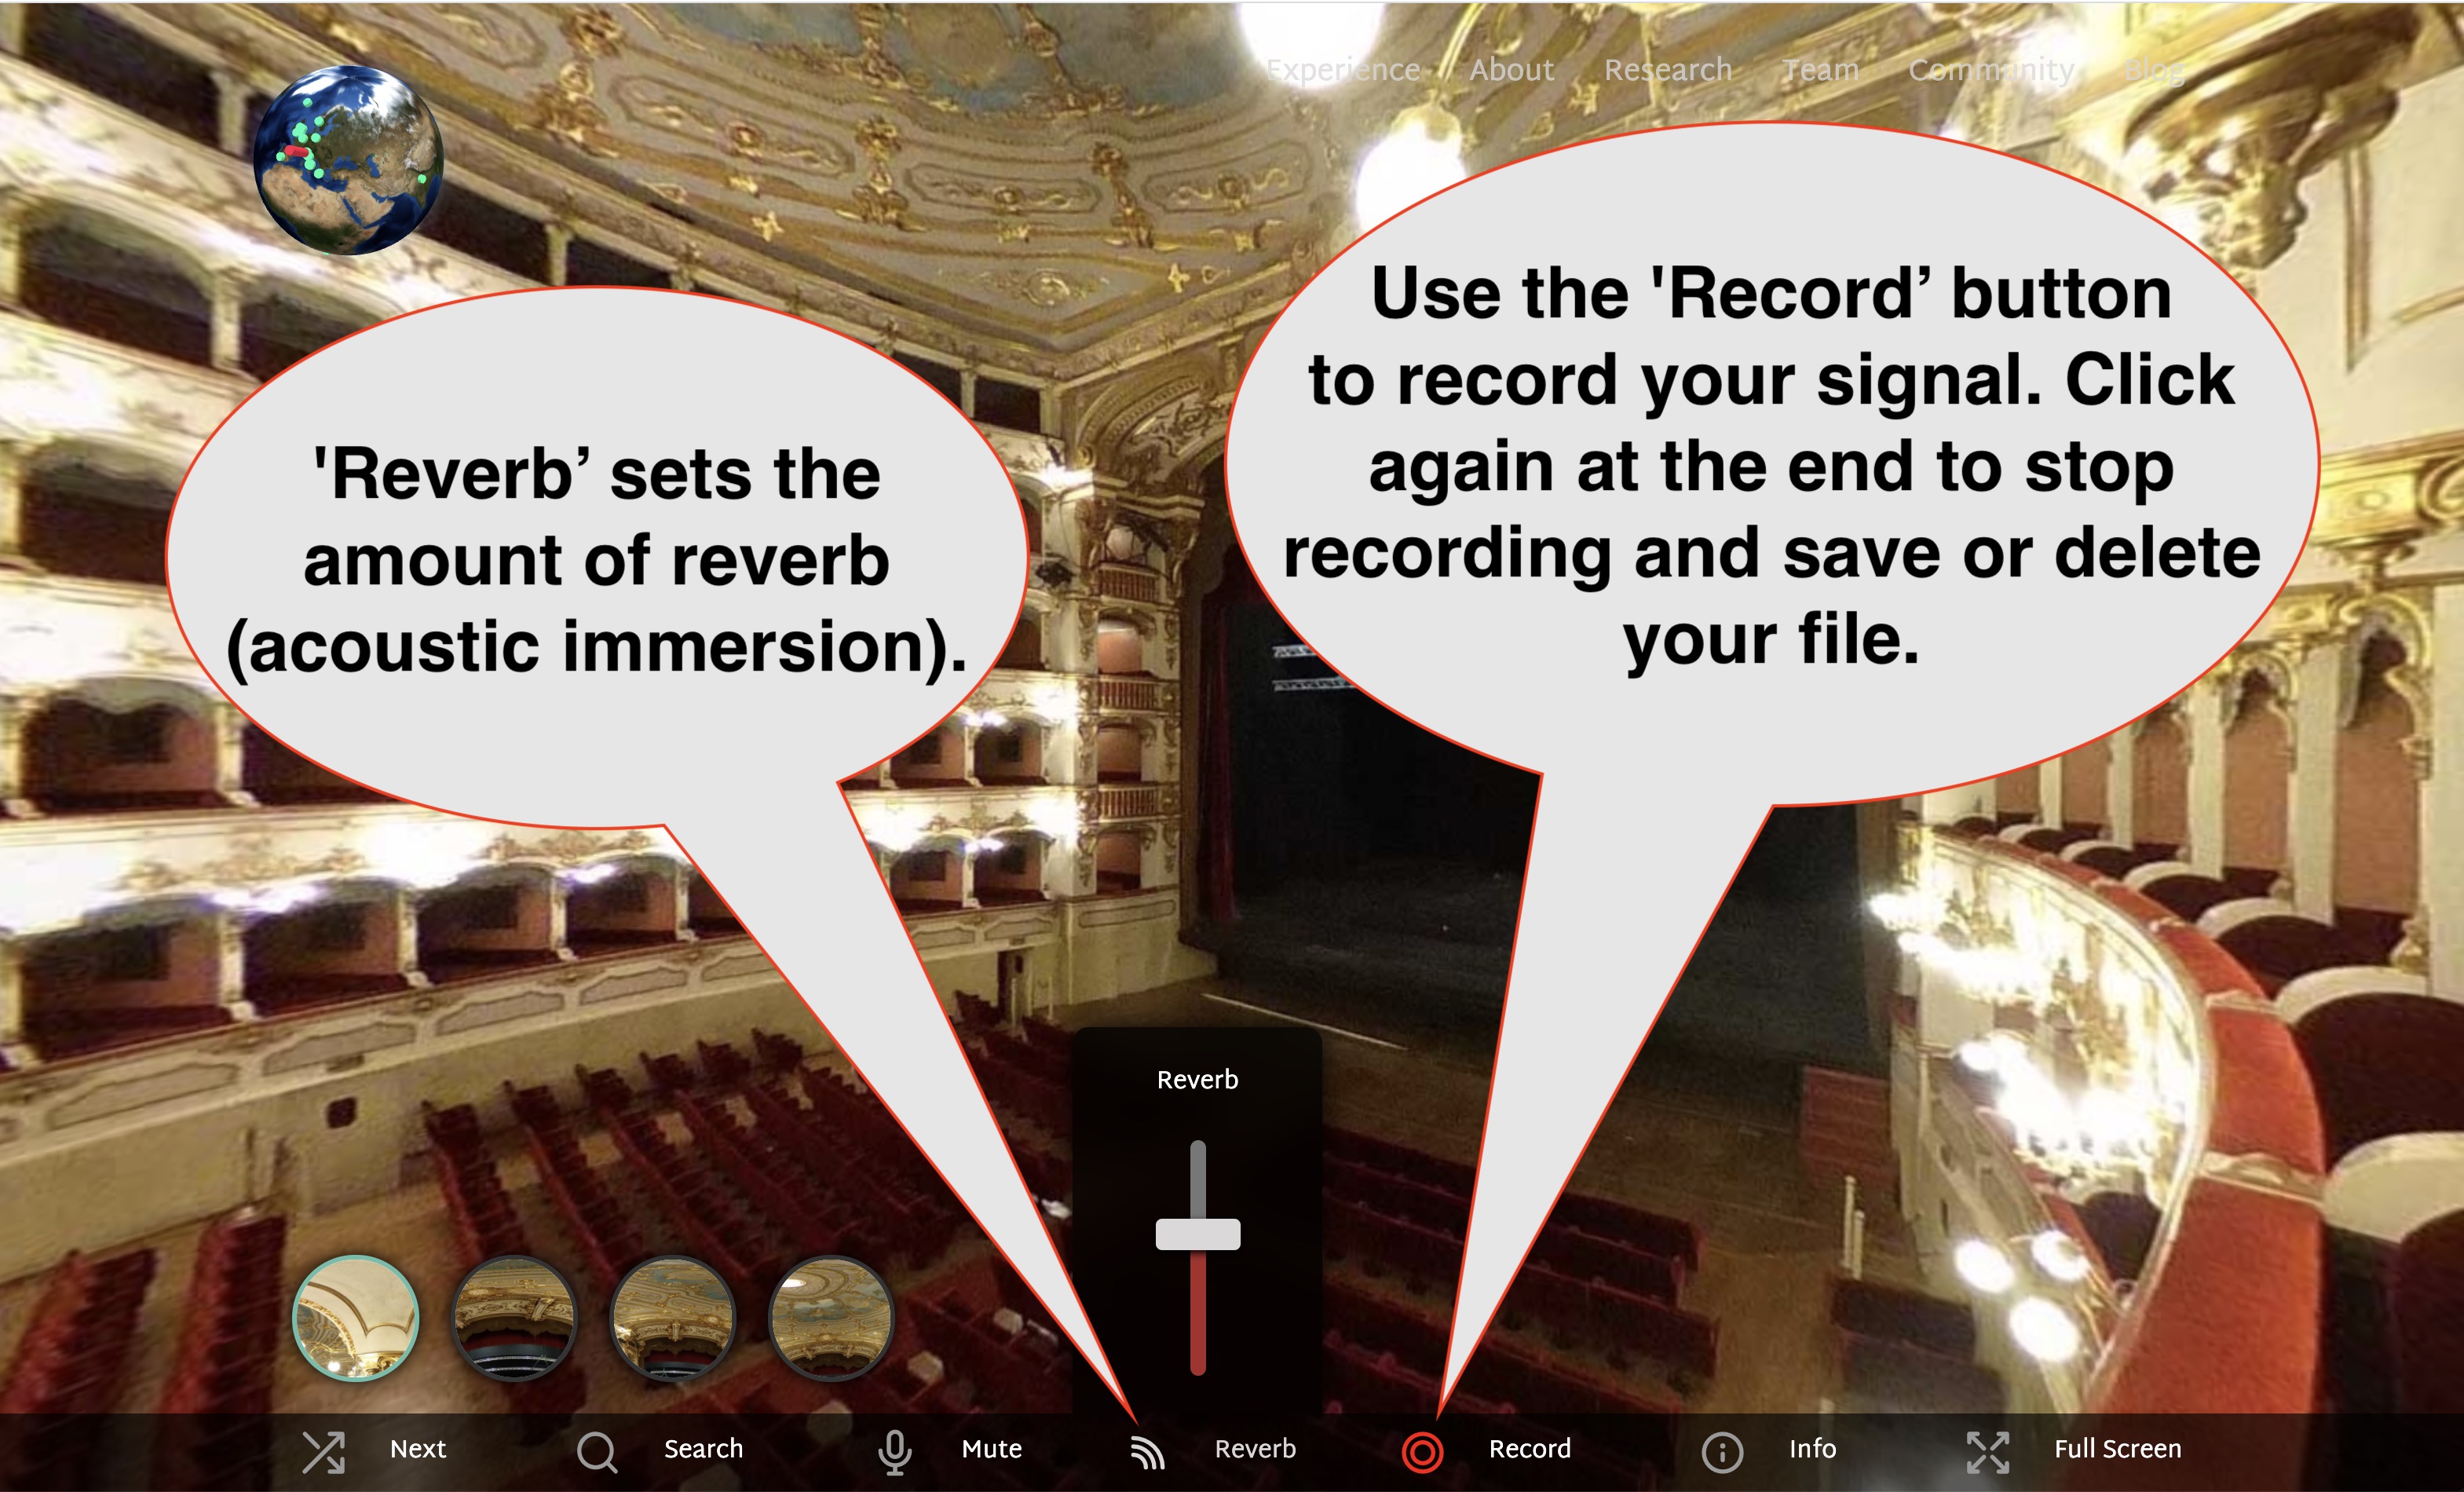 use the 'reverb' button to adjust the amount of reverb you will hear and use the 'record' button next to it to record your voice. after your are done you will have the option to save or delete the recording to your own device